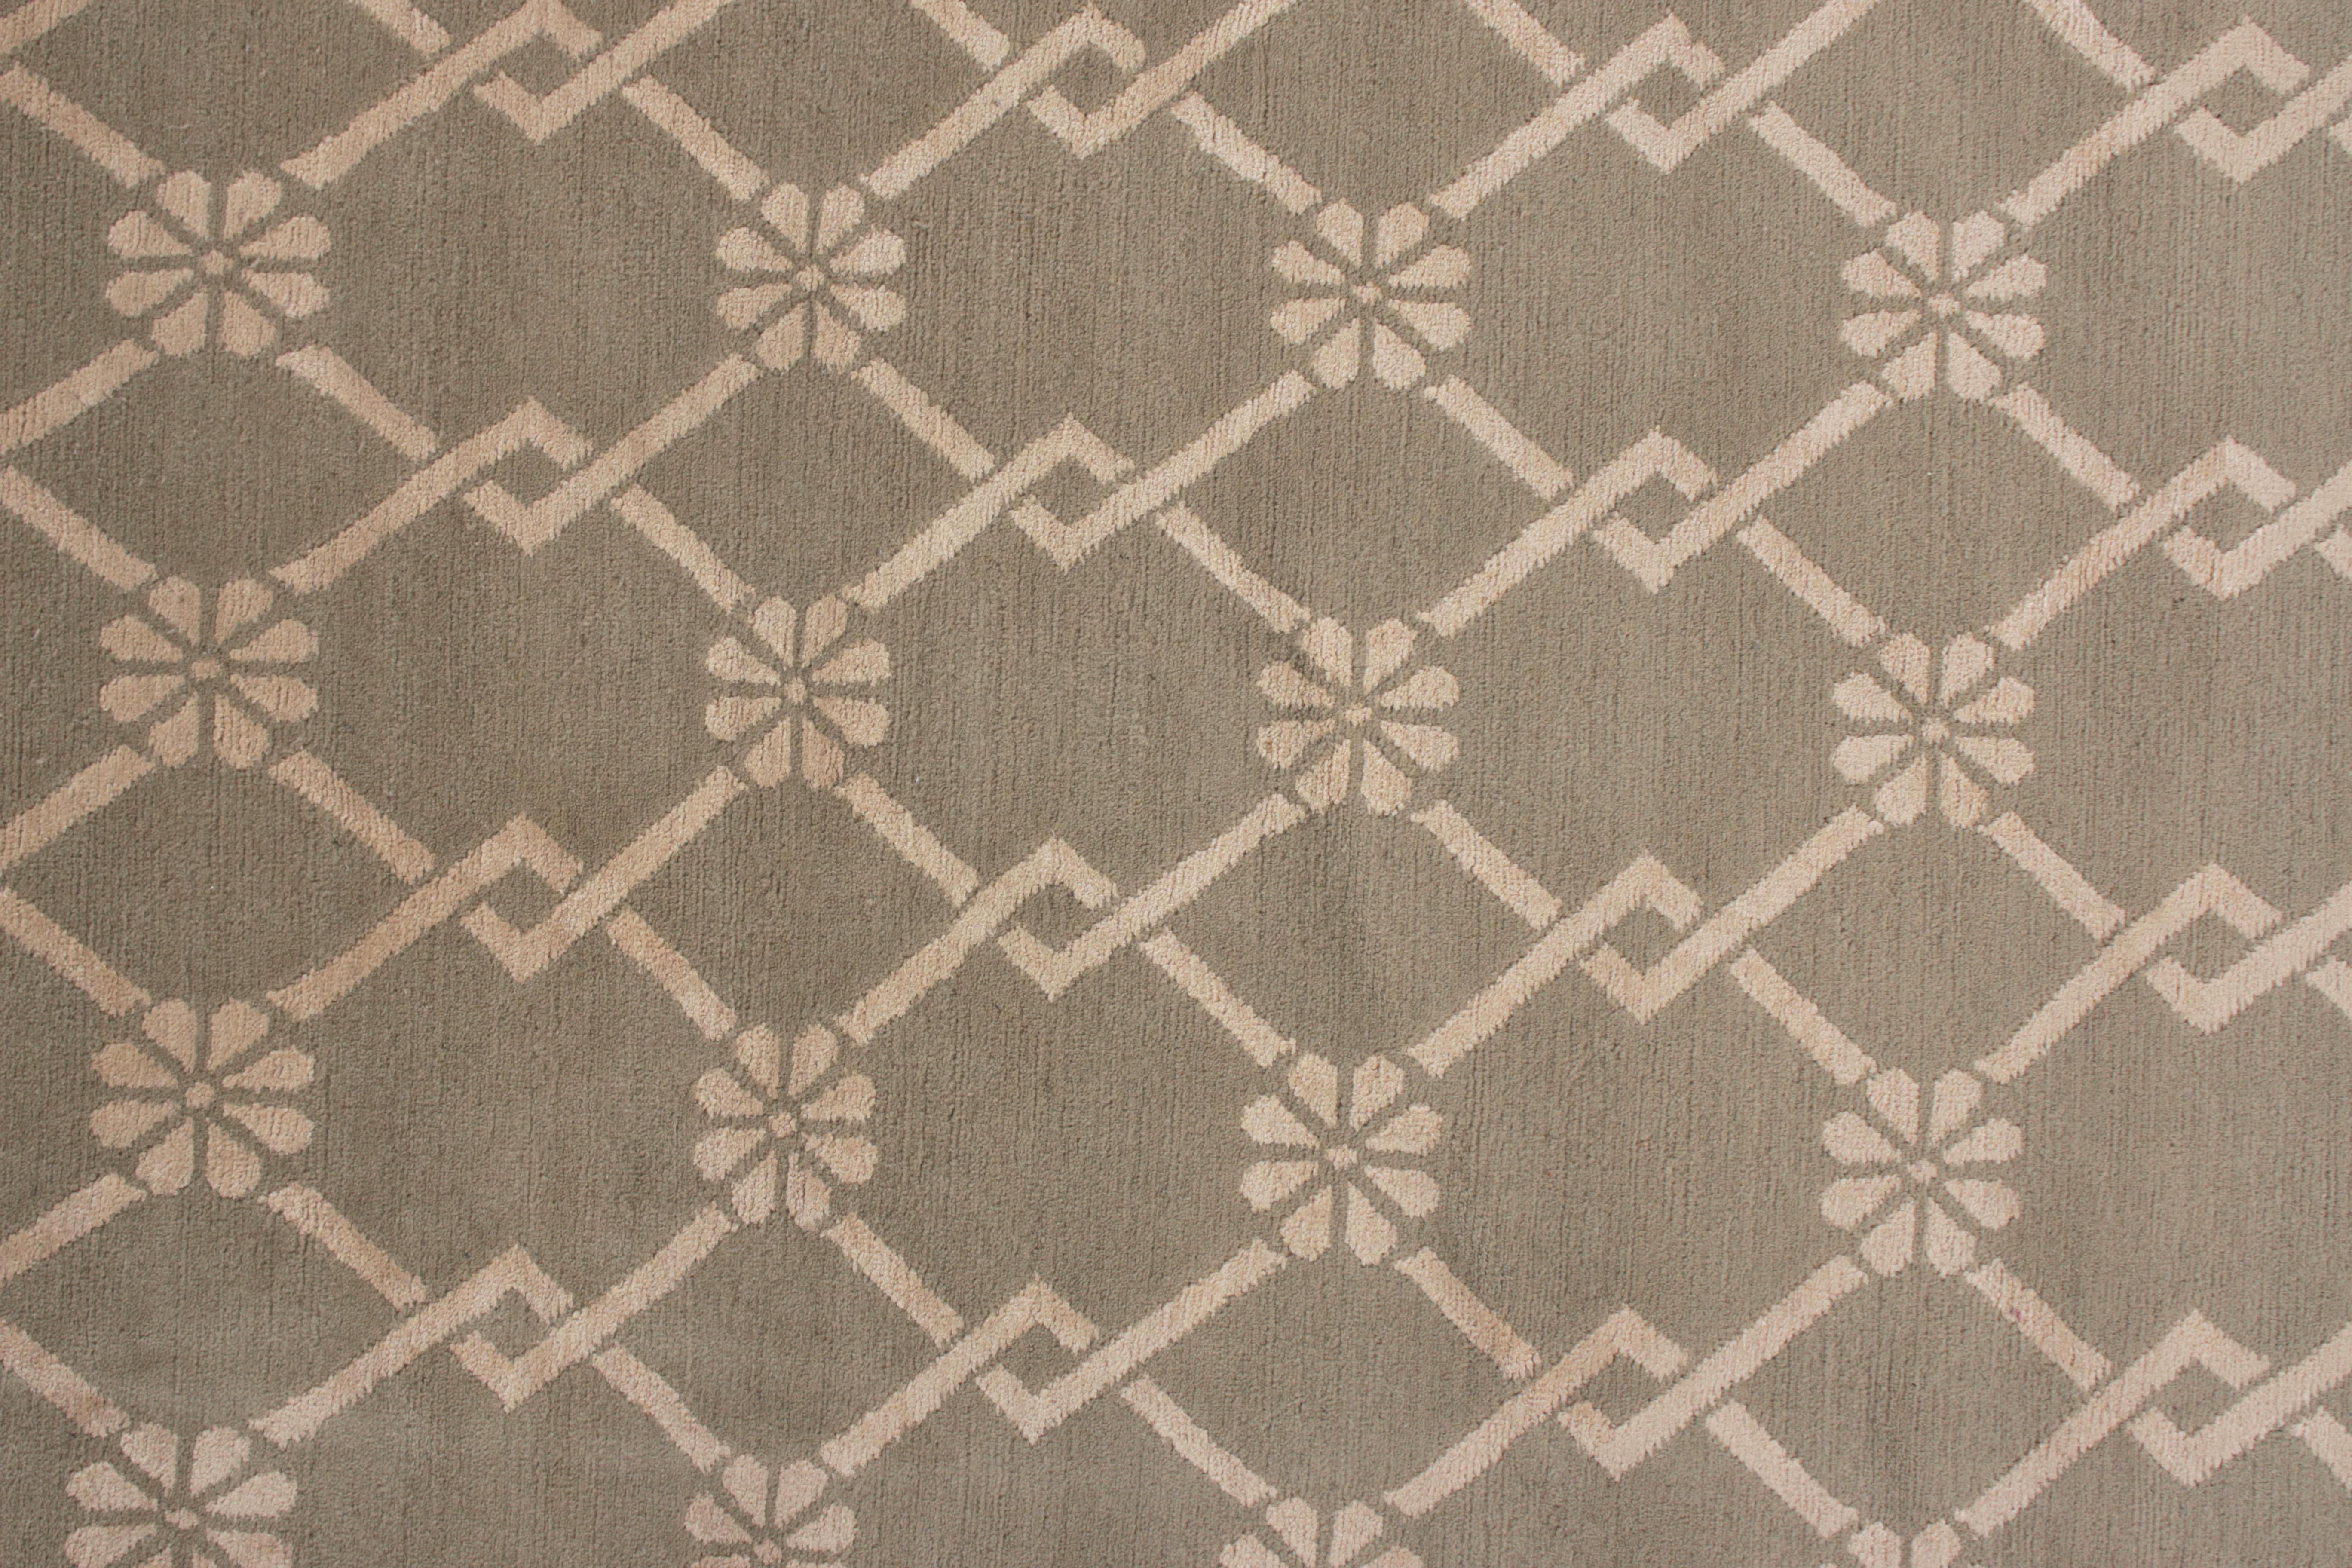 Art Deco Rug & Kilim's Hand Knotted Aubusson Style Rug in Beige-Brown Medallion Pattern